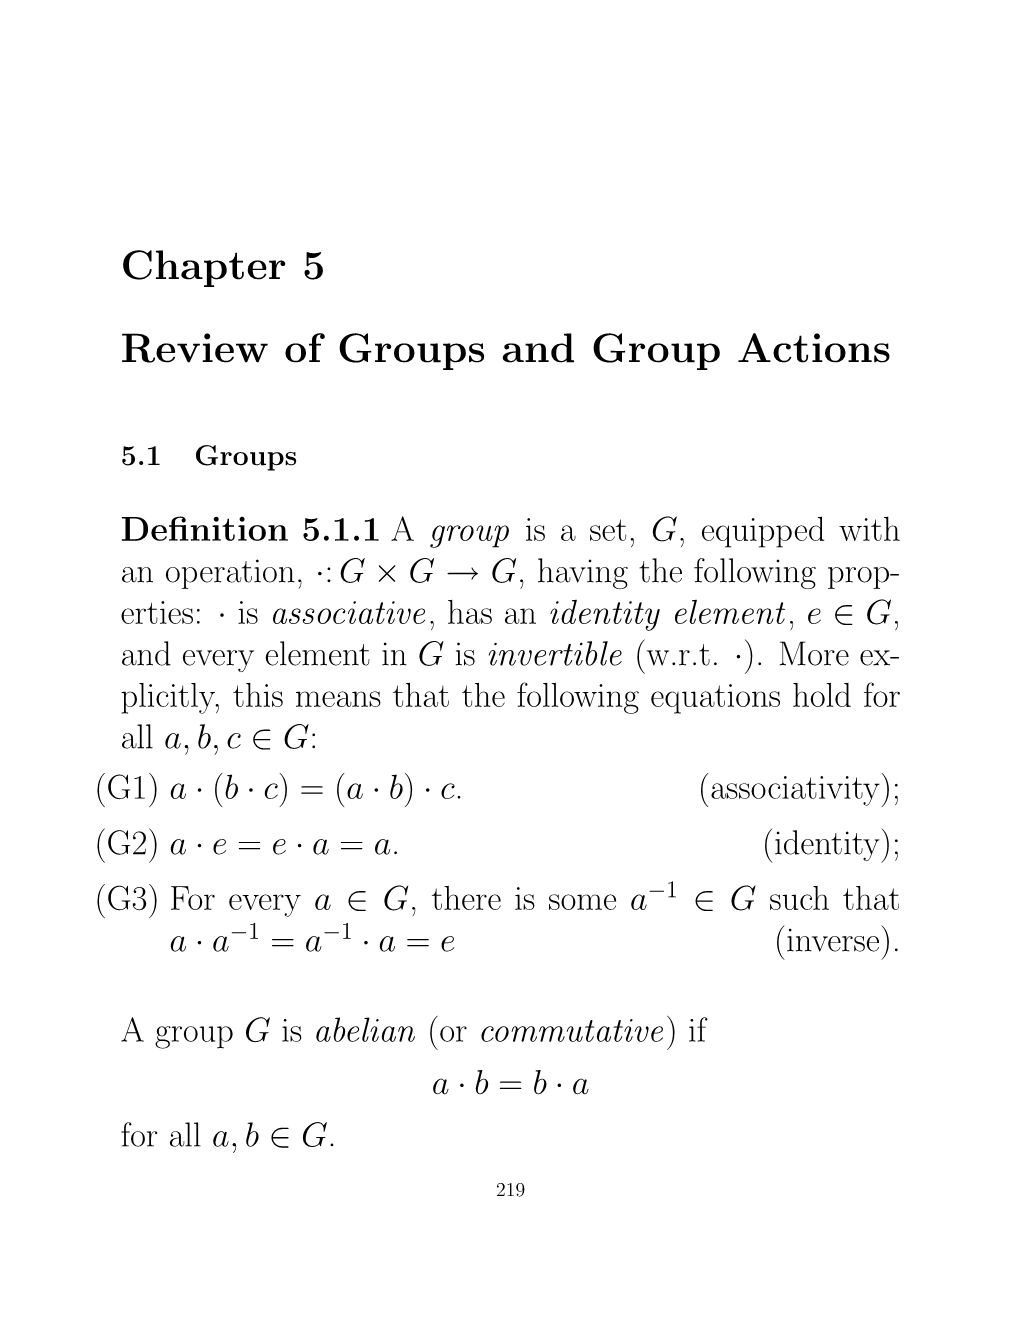 Chapter 5 Review of Groups and Group Actions